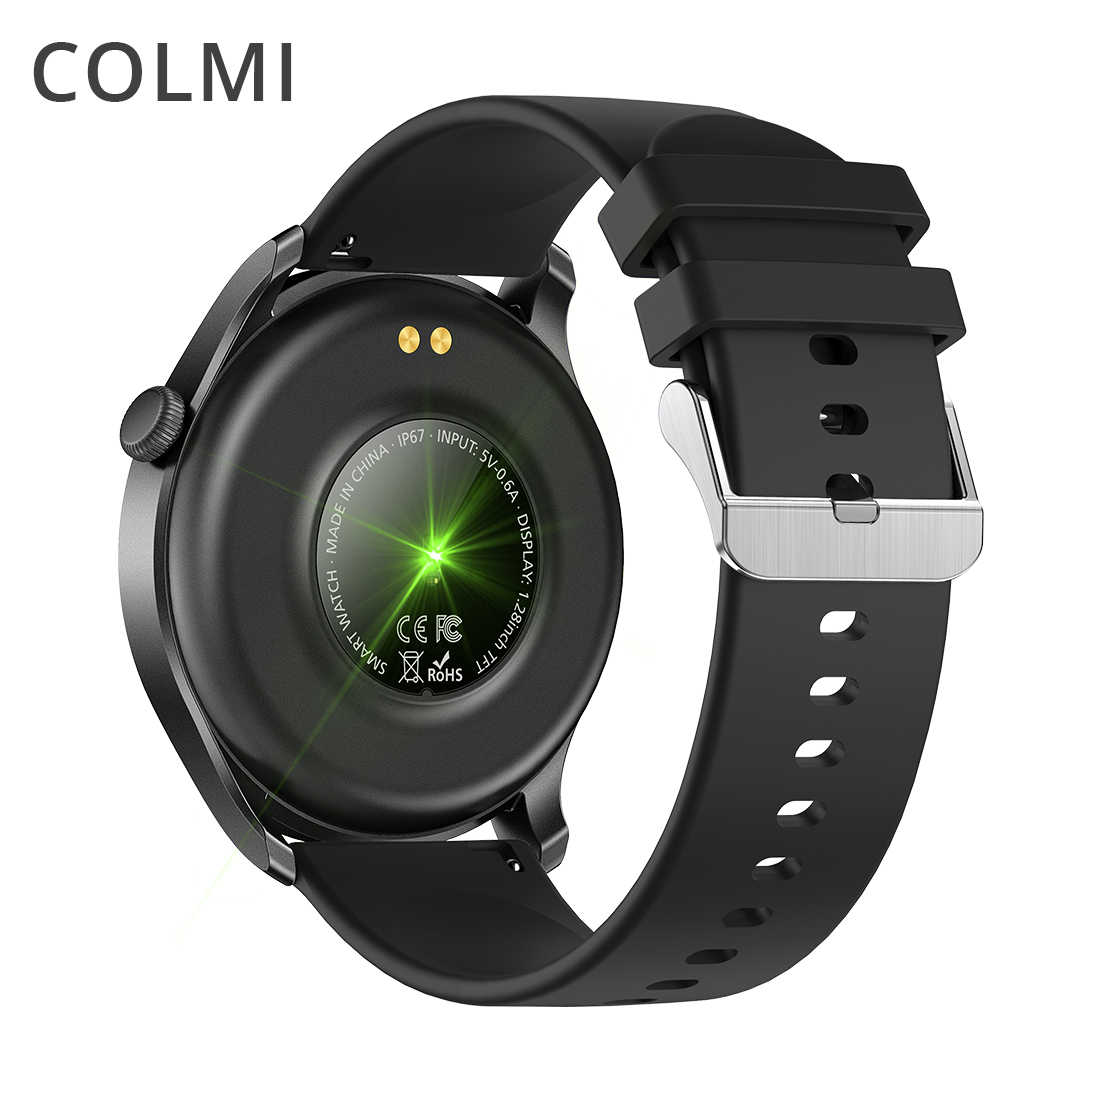 COLMI SKY 8 Smart Watch Women IP67 IMPERVIUS Bluetooth Smartwatch Men For Android i ((3)